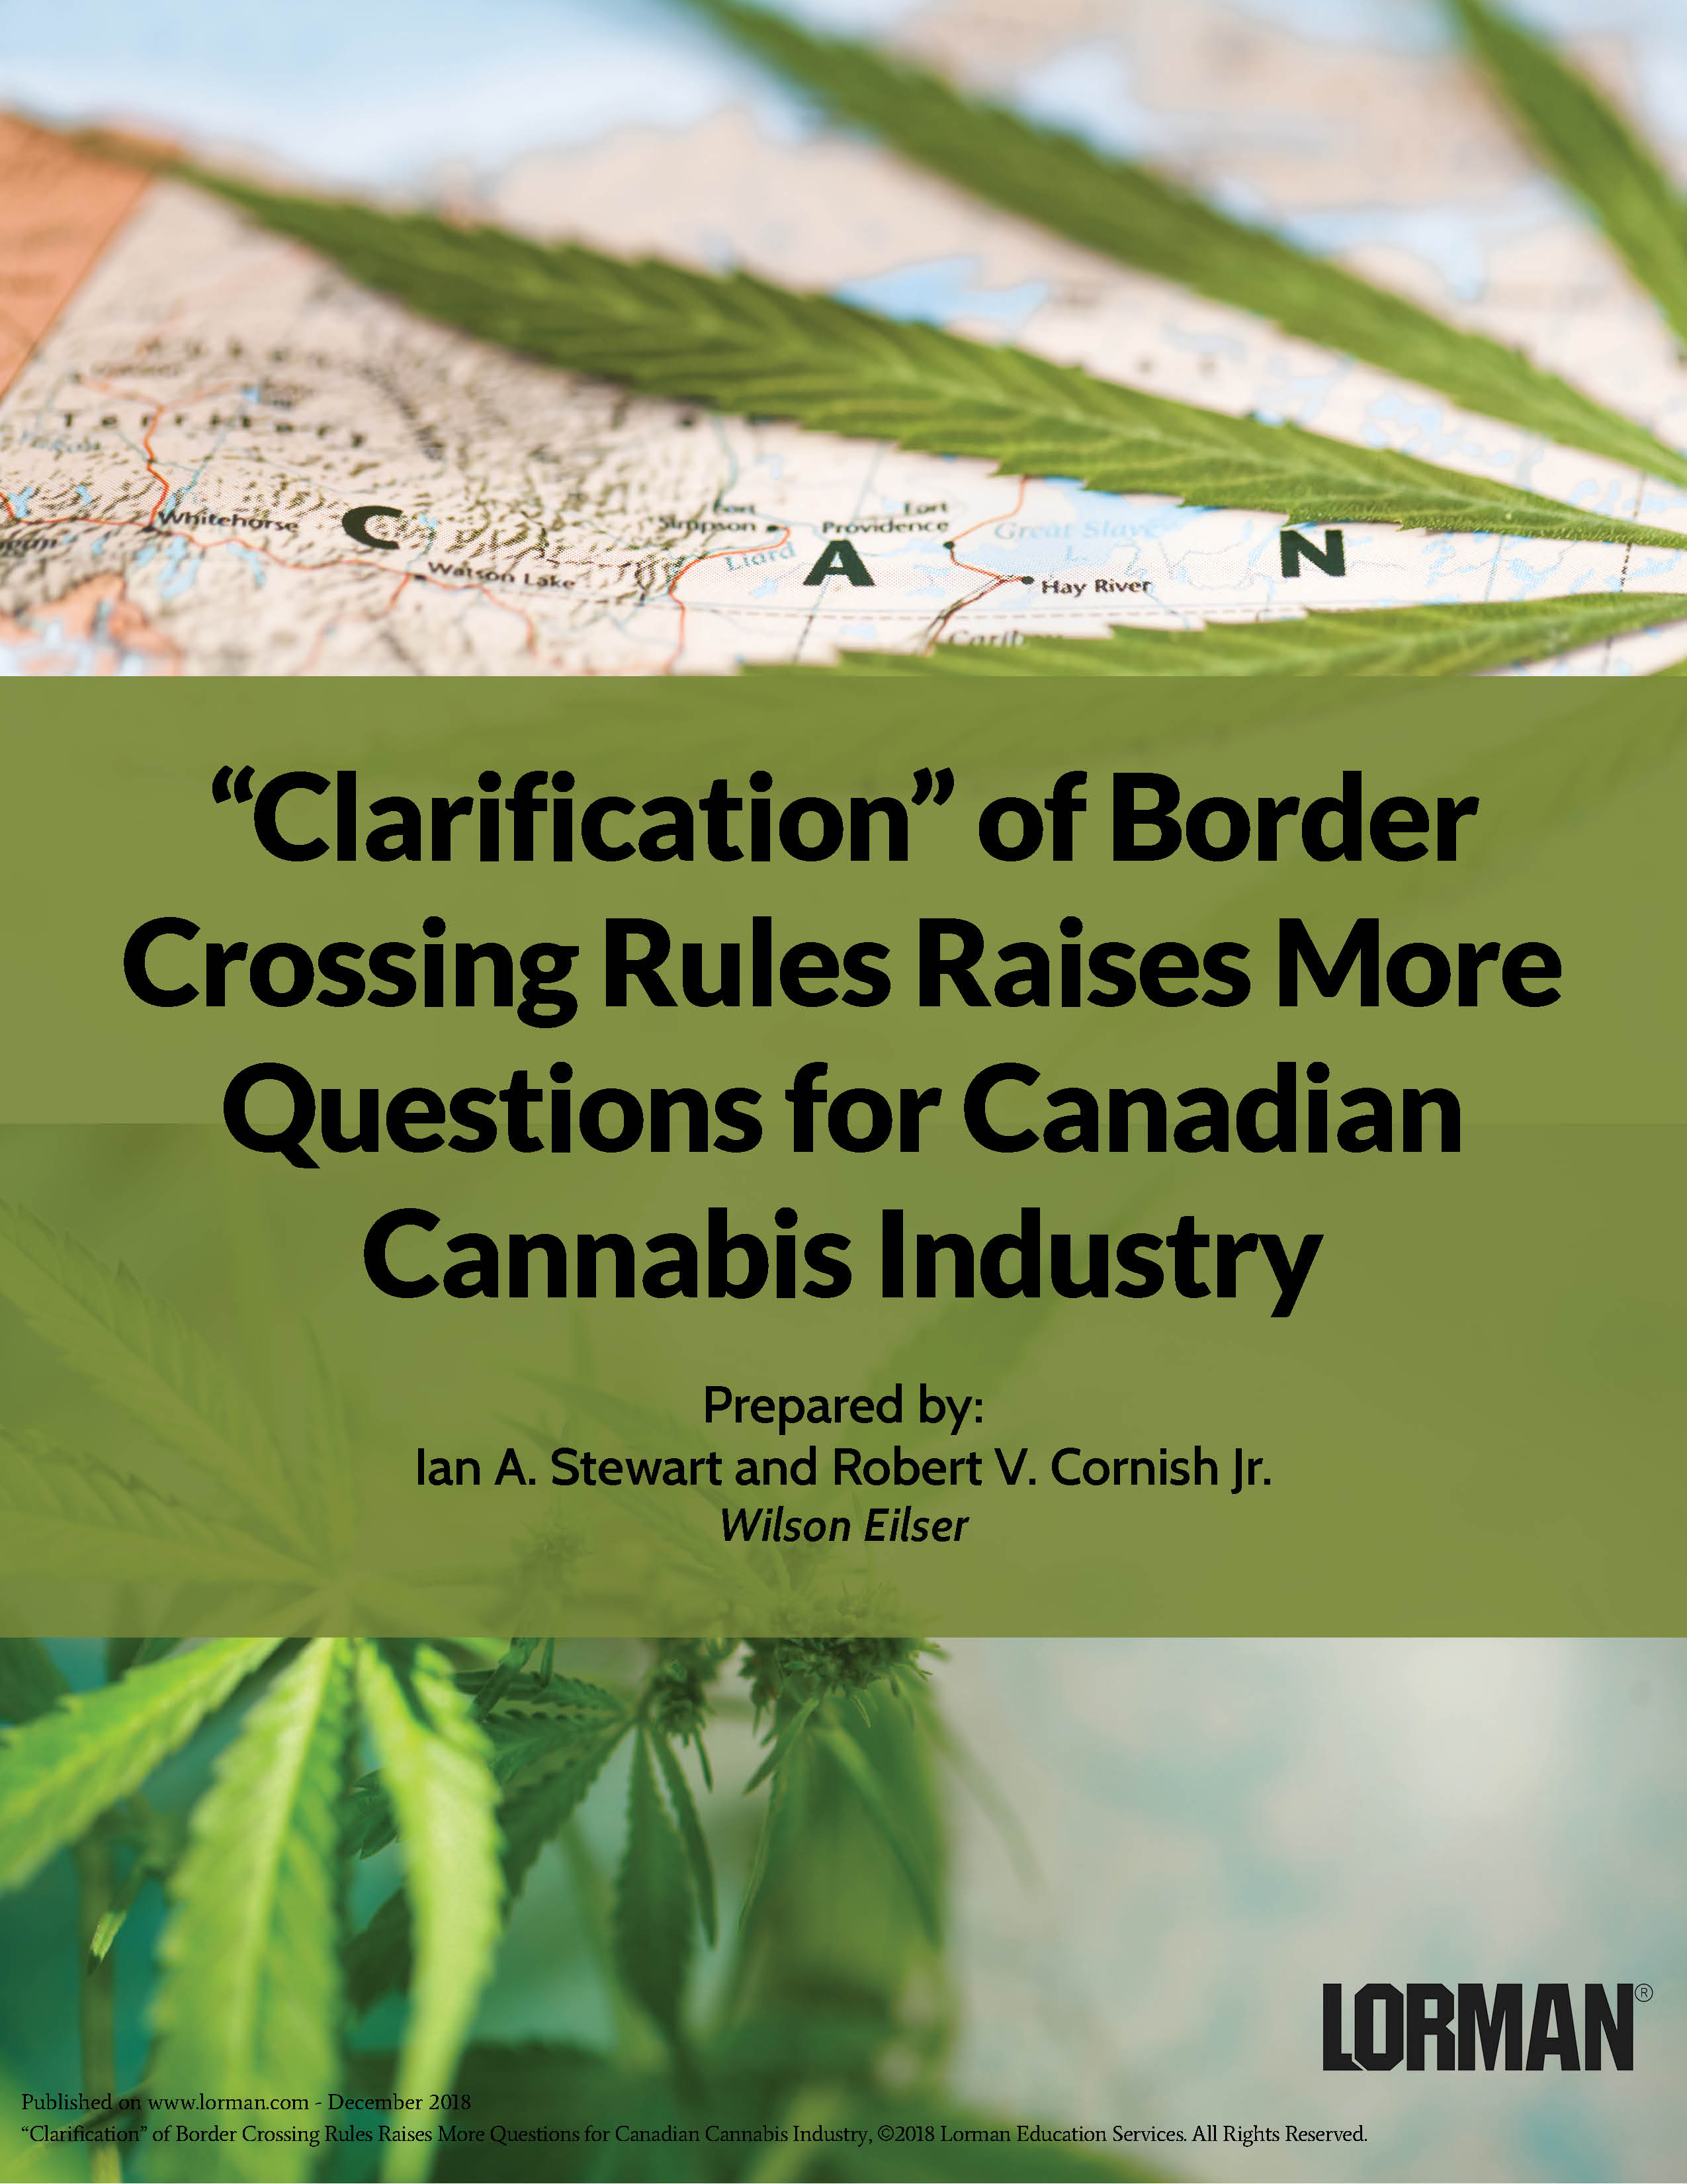 “Clarification” of Border Crossing Rules Raises More Questions for Canadian Cannabis Industry